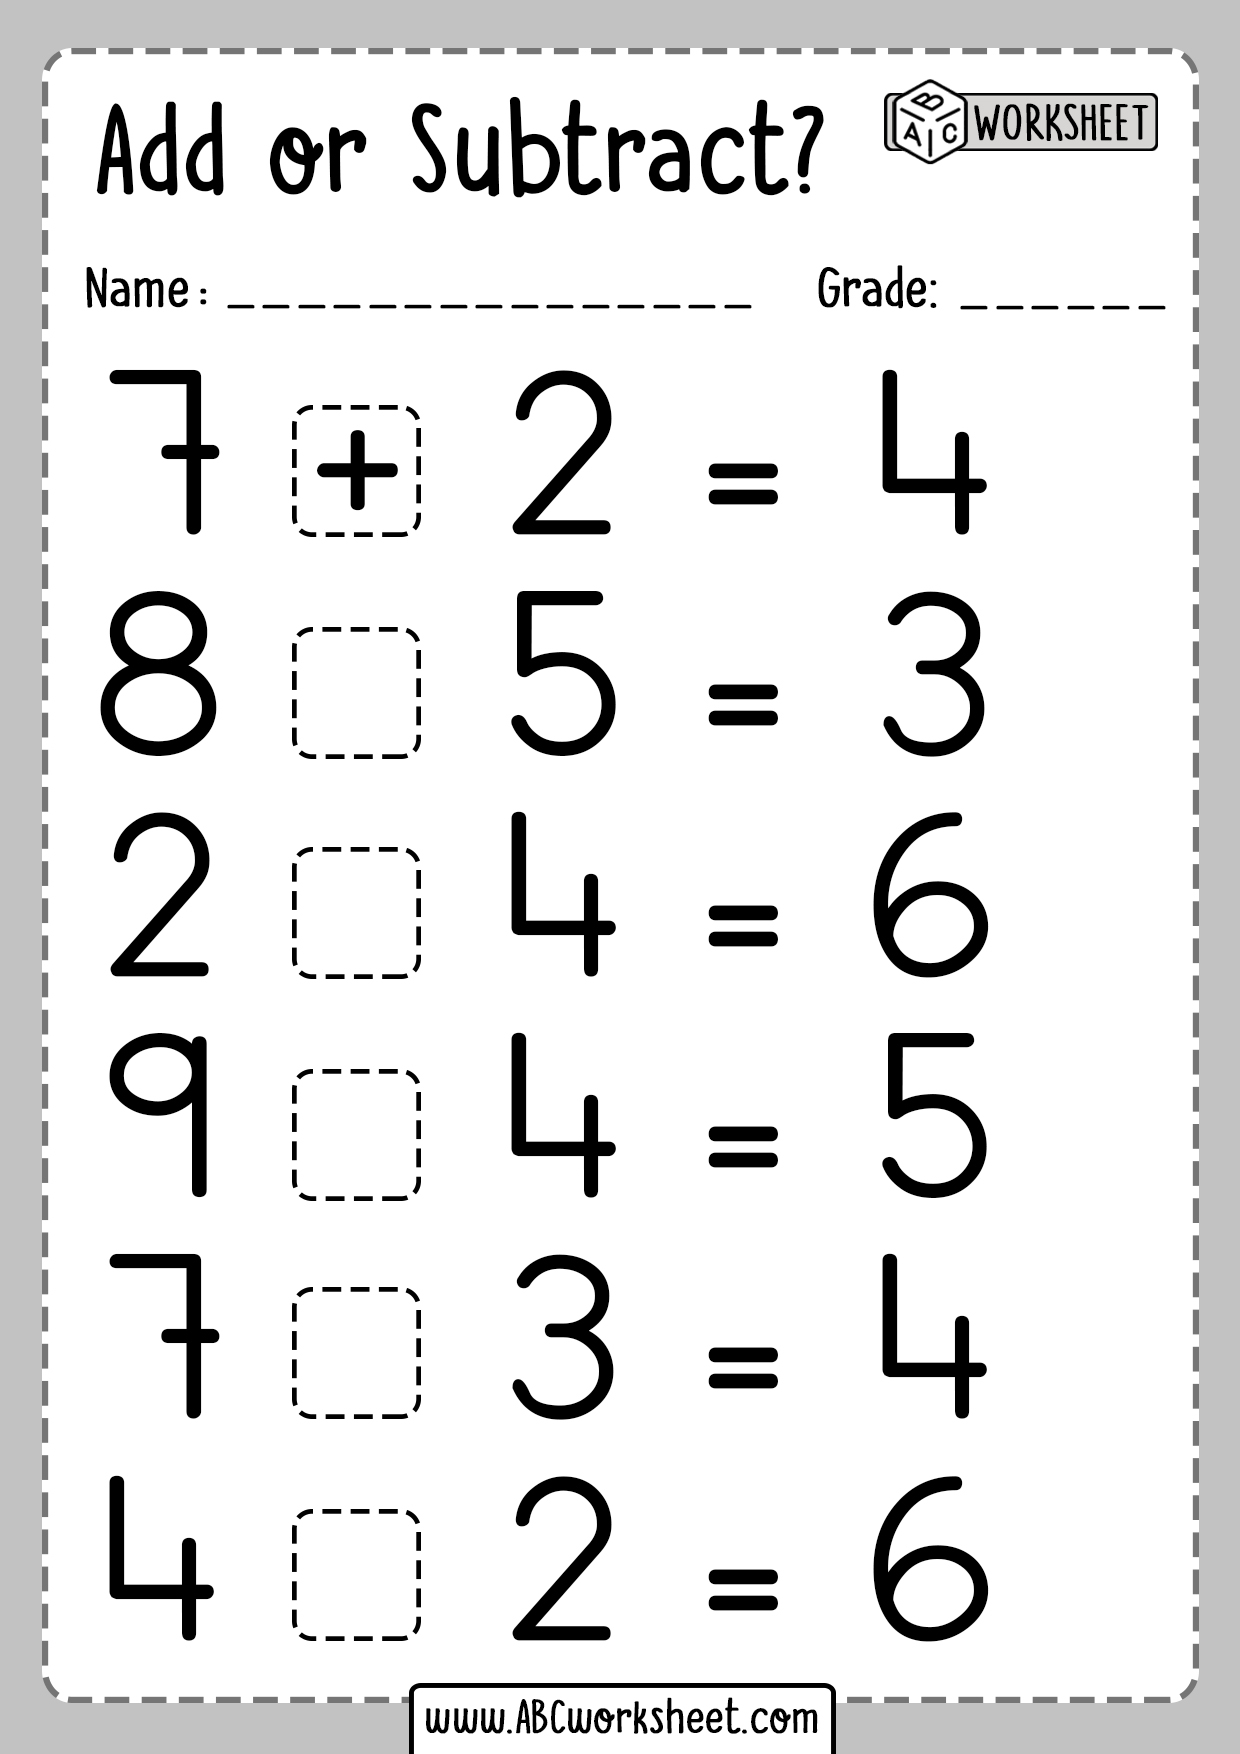 adding-or-subtracting-math-worksheets